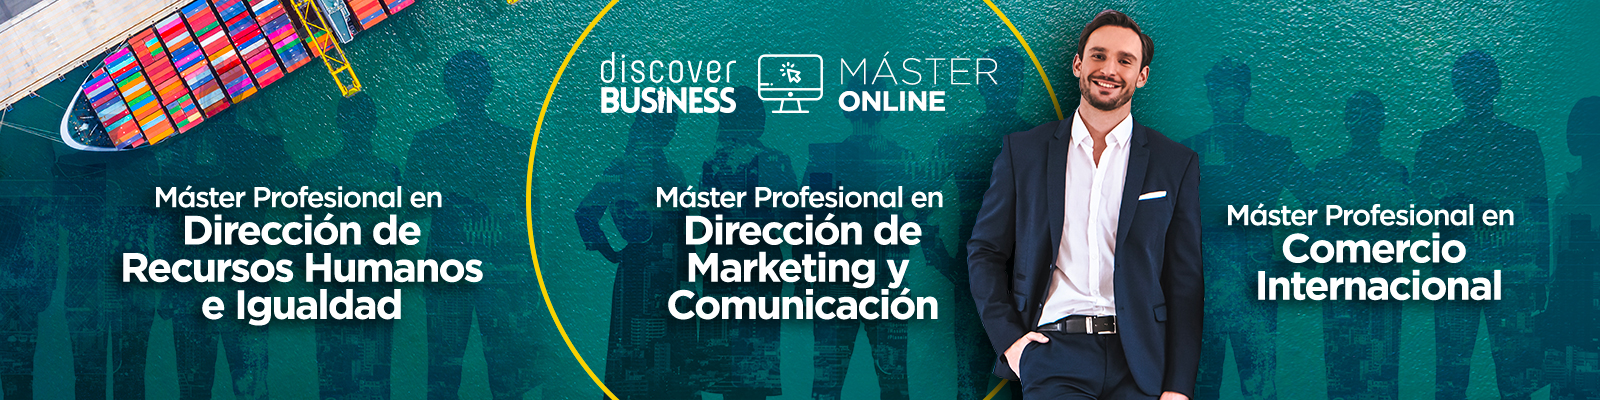 Másteres Online | Discover Business